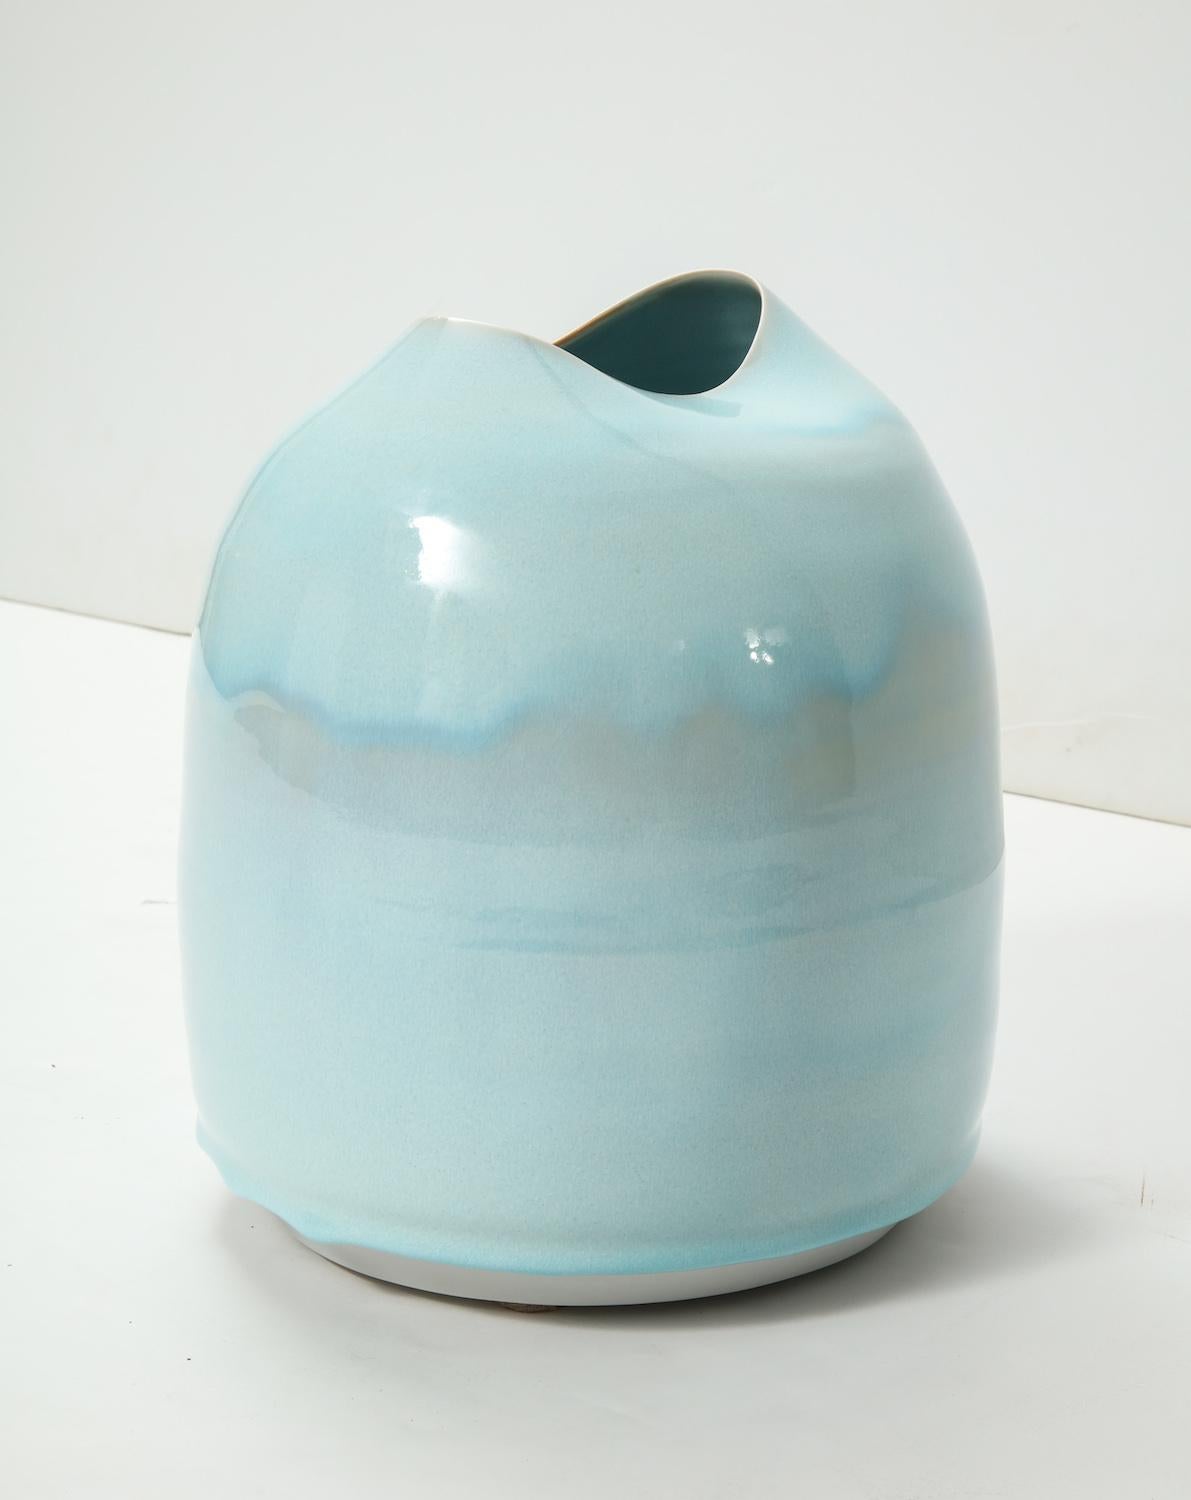 Wheel-thrown porcelain vase with oval formed mouth at top. Pale blue dripping glaze. Signed on underside with artists logo.